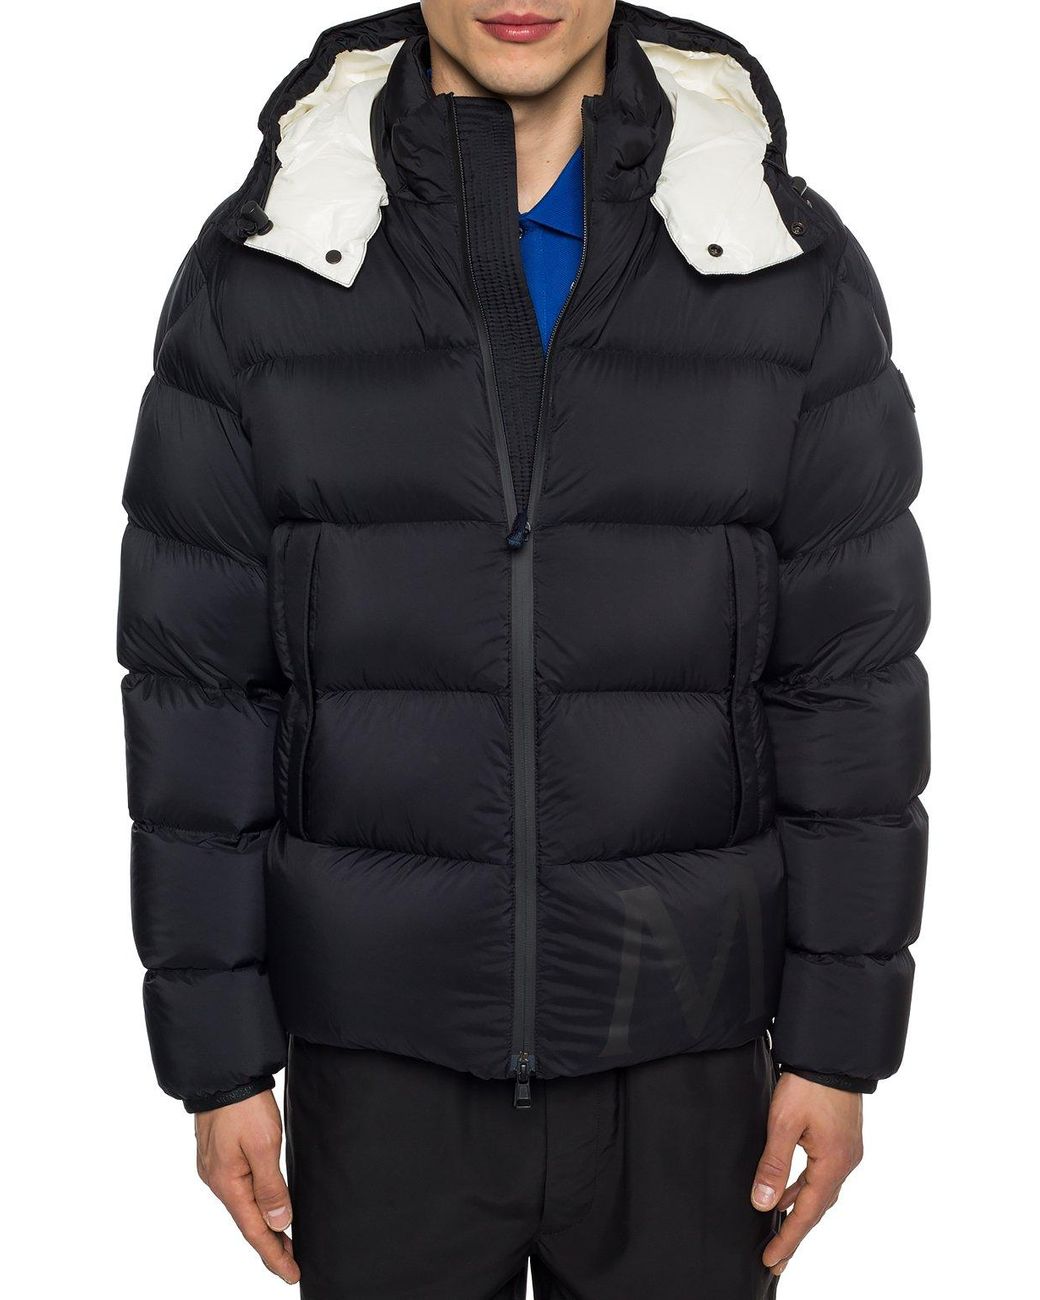 Moncler 'wilms' Quilted Down Jacket in Black for Men | Lyst UK